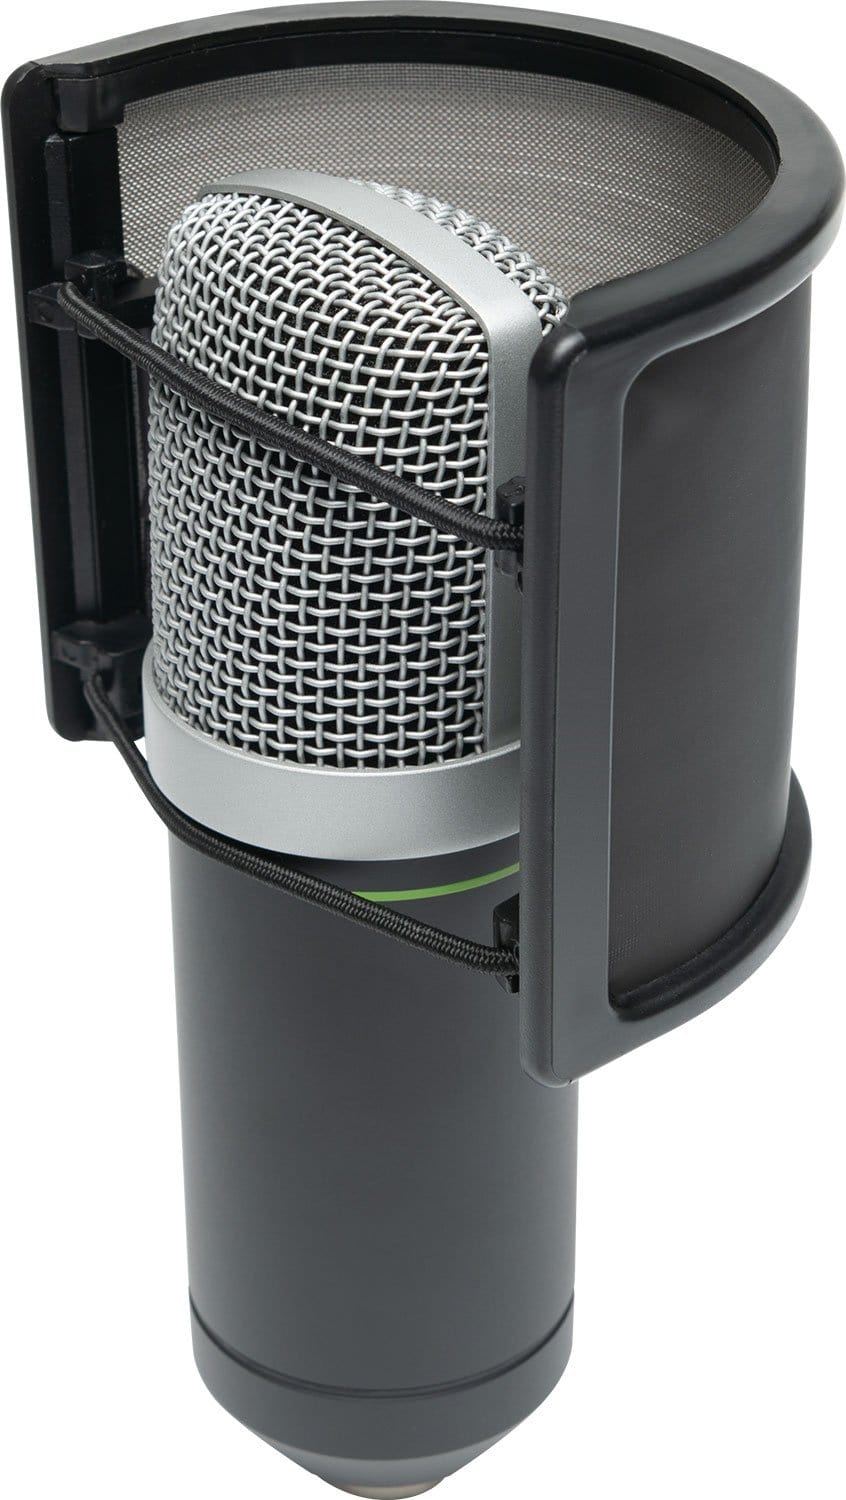 Mackie PF-100 Pop Screen for ELEMENT Series Mics - PSSL ProSound and Stage Lighting